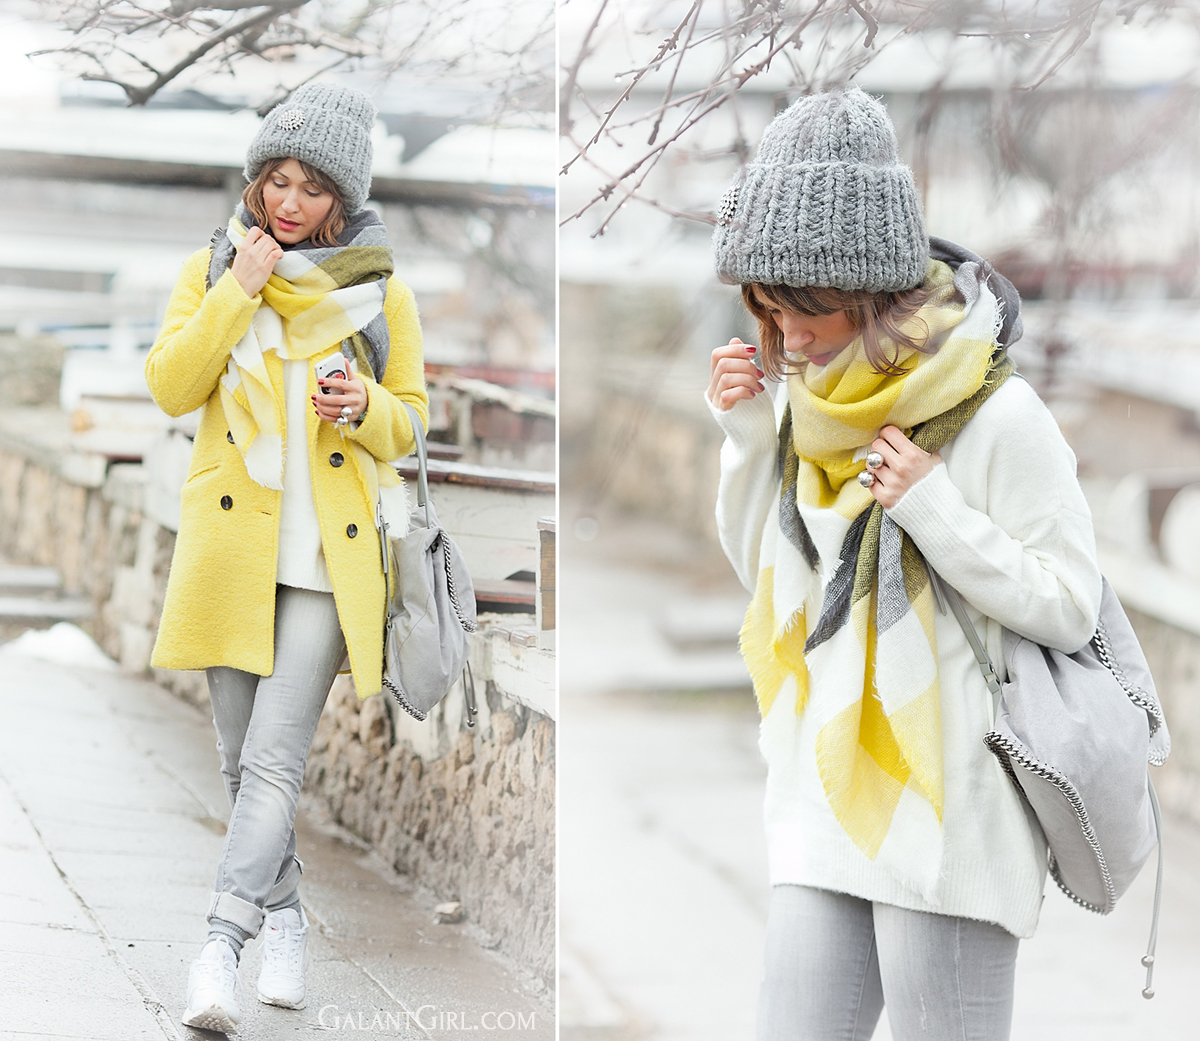 chunky beanie, Choies scarf, galant girl, white winter outfit,